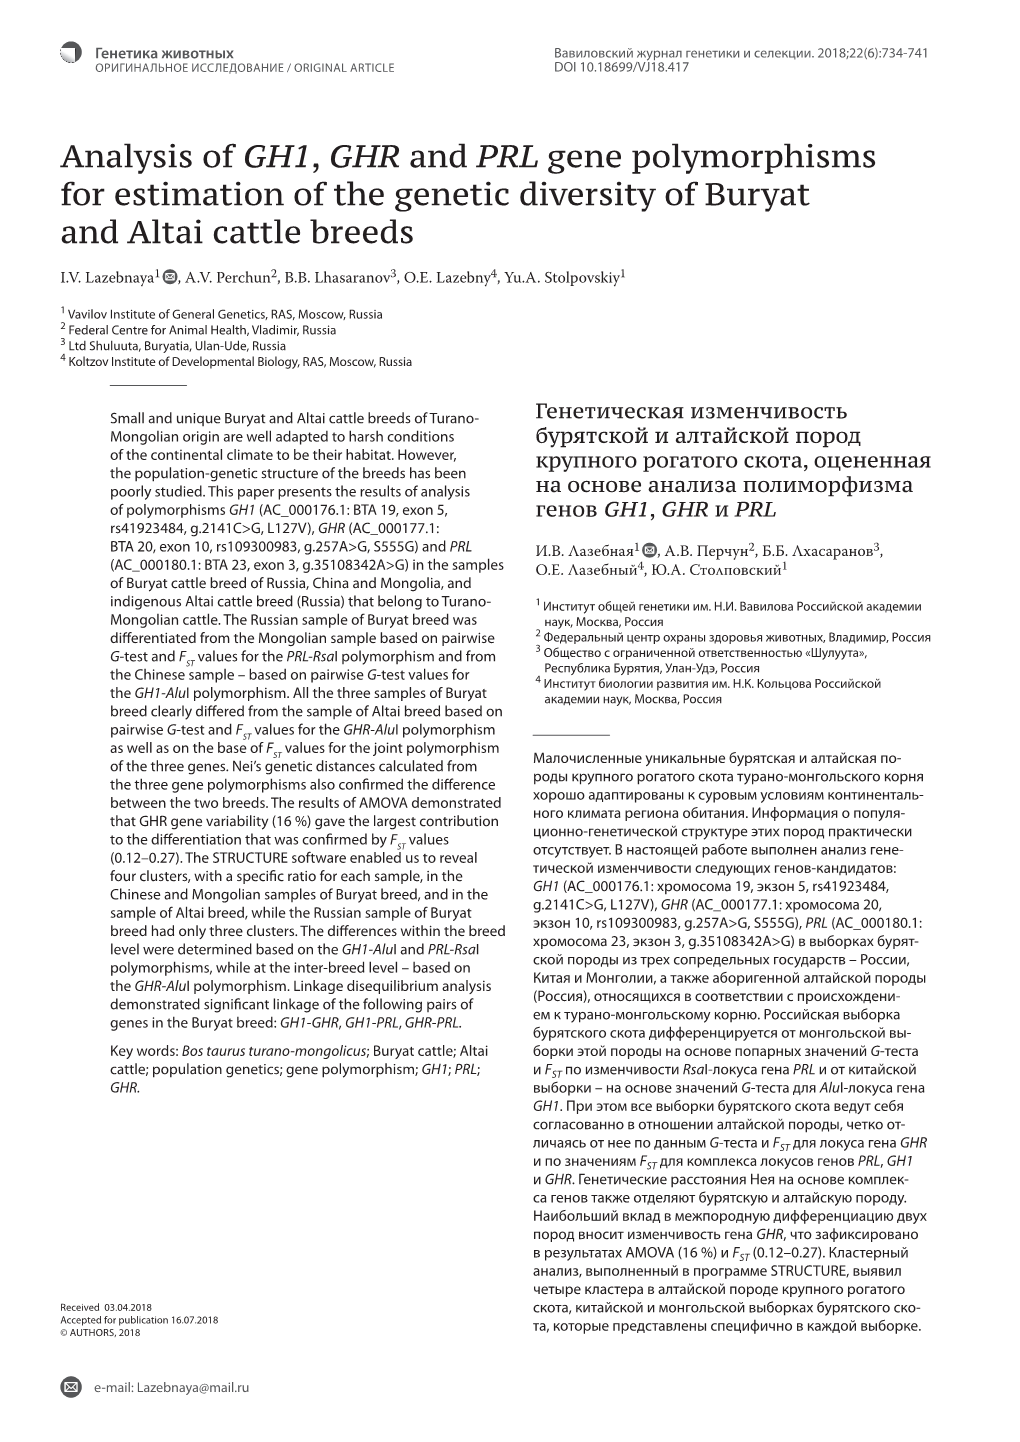 Analysis of GH1, GHR and PRL Gene Polymorphisms for Estimation of the Genetic Diversity of Buryat and Altai Cattle Breeds